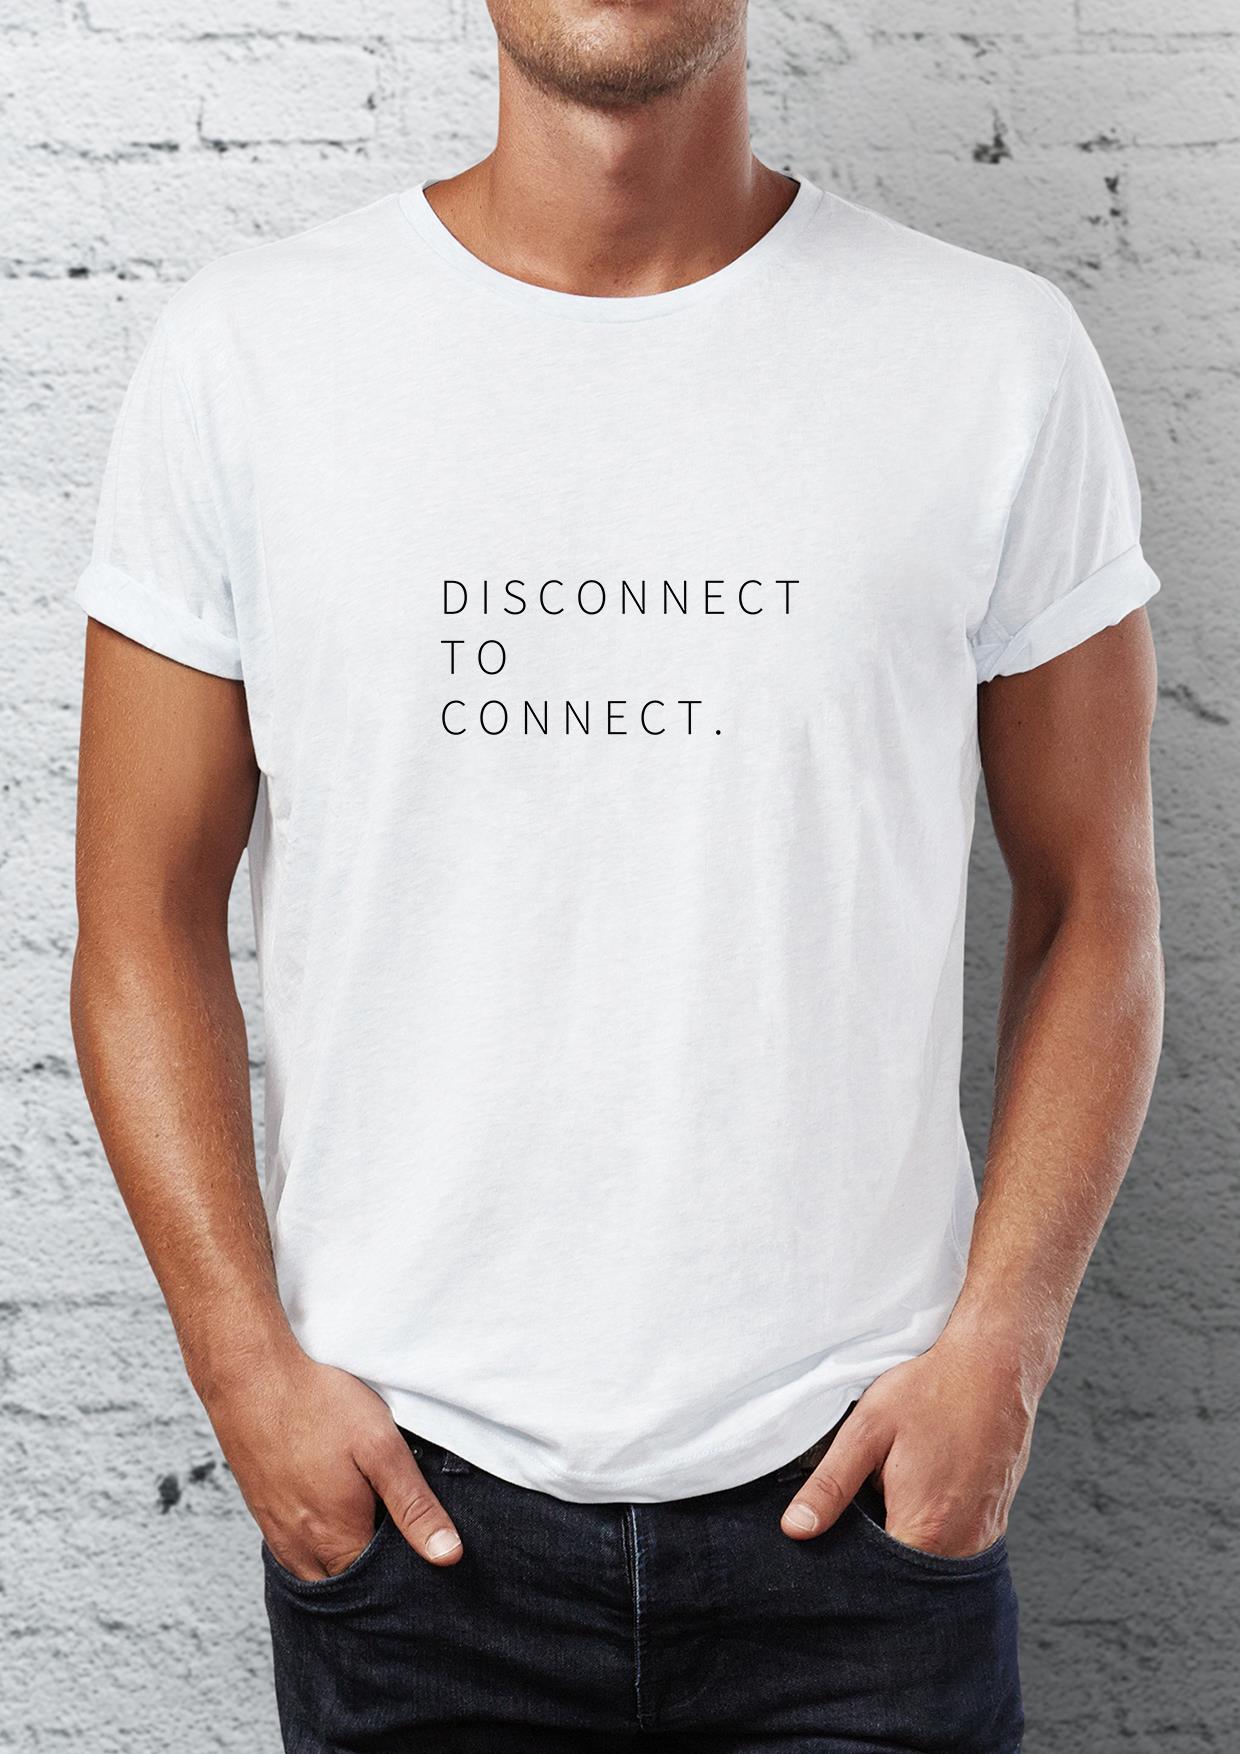 Disconnect graphic printed Crew Neck men's t -shirt